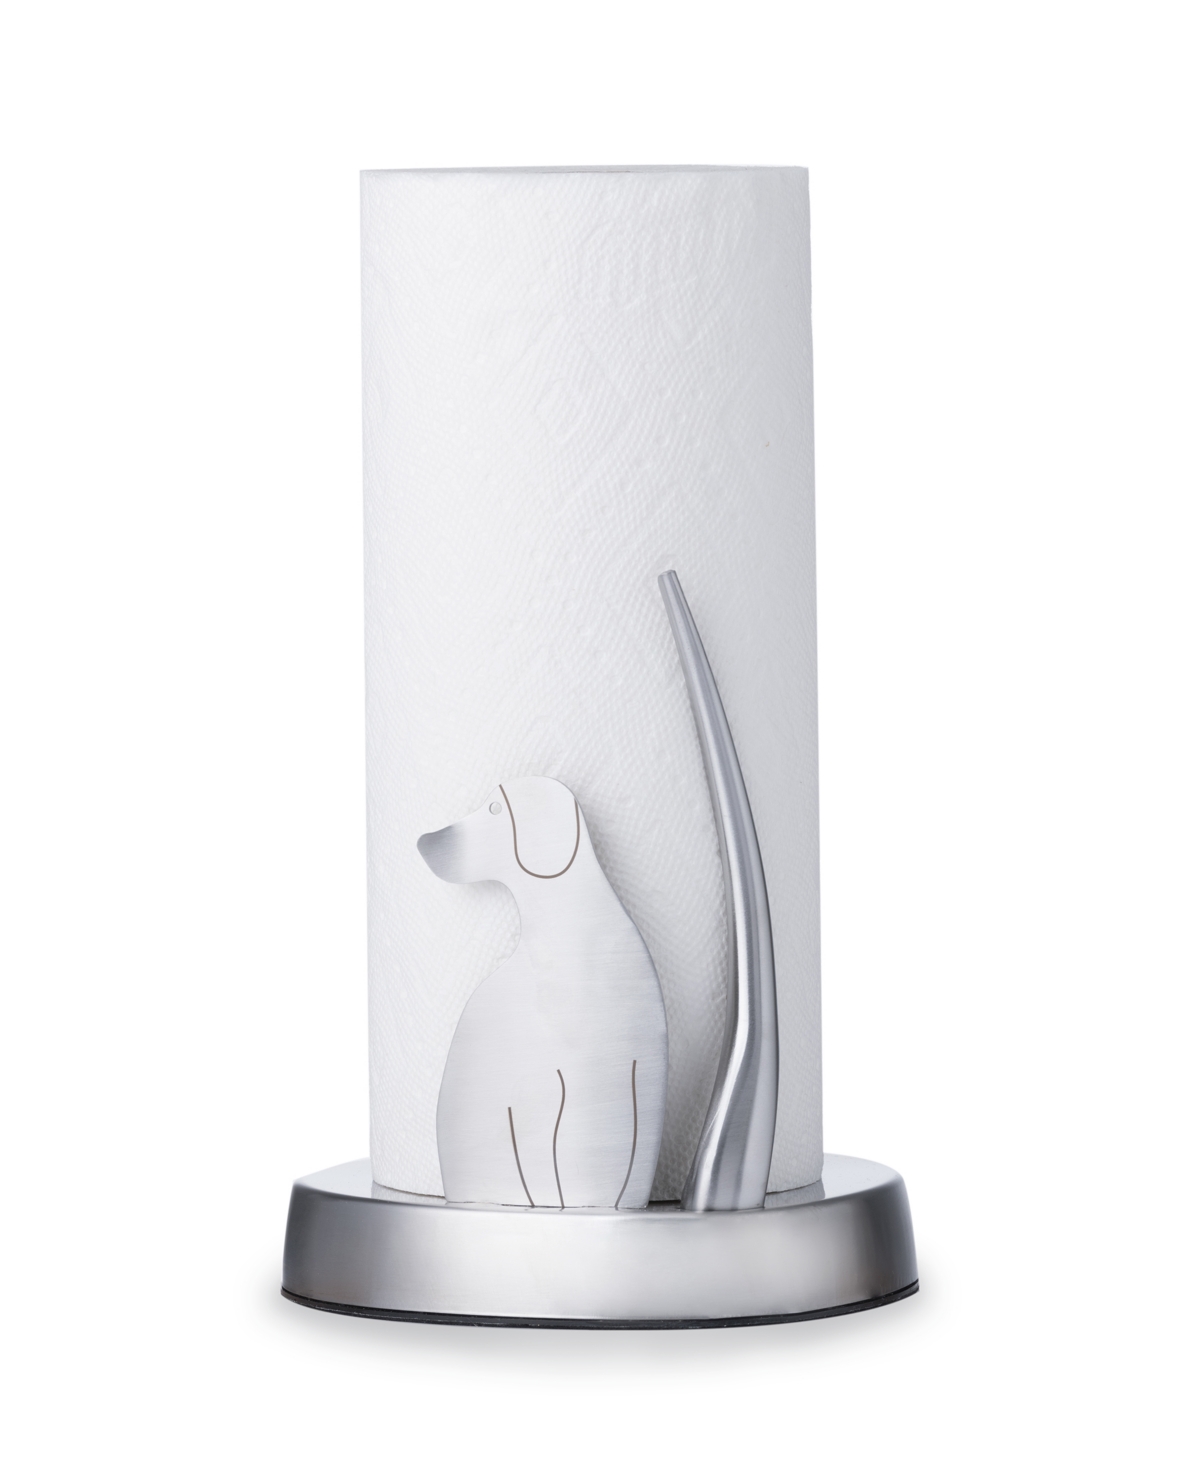 Woof Small Size Paper Towel Holder - Silver-Tone